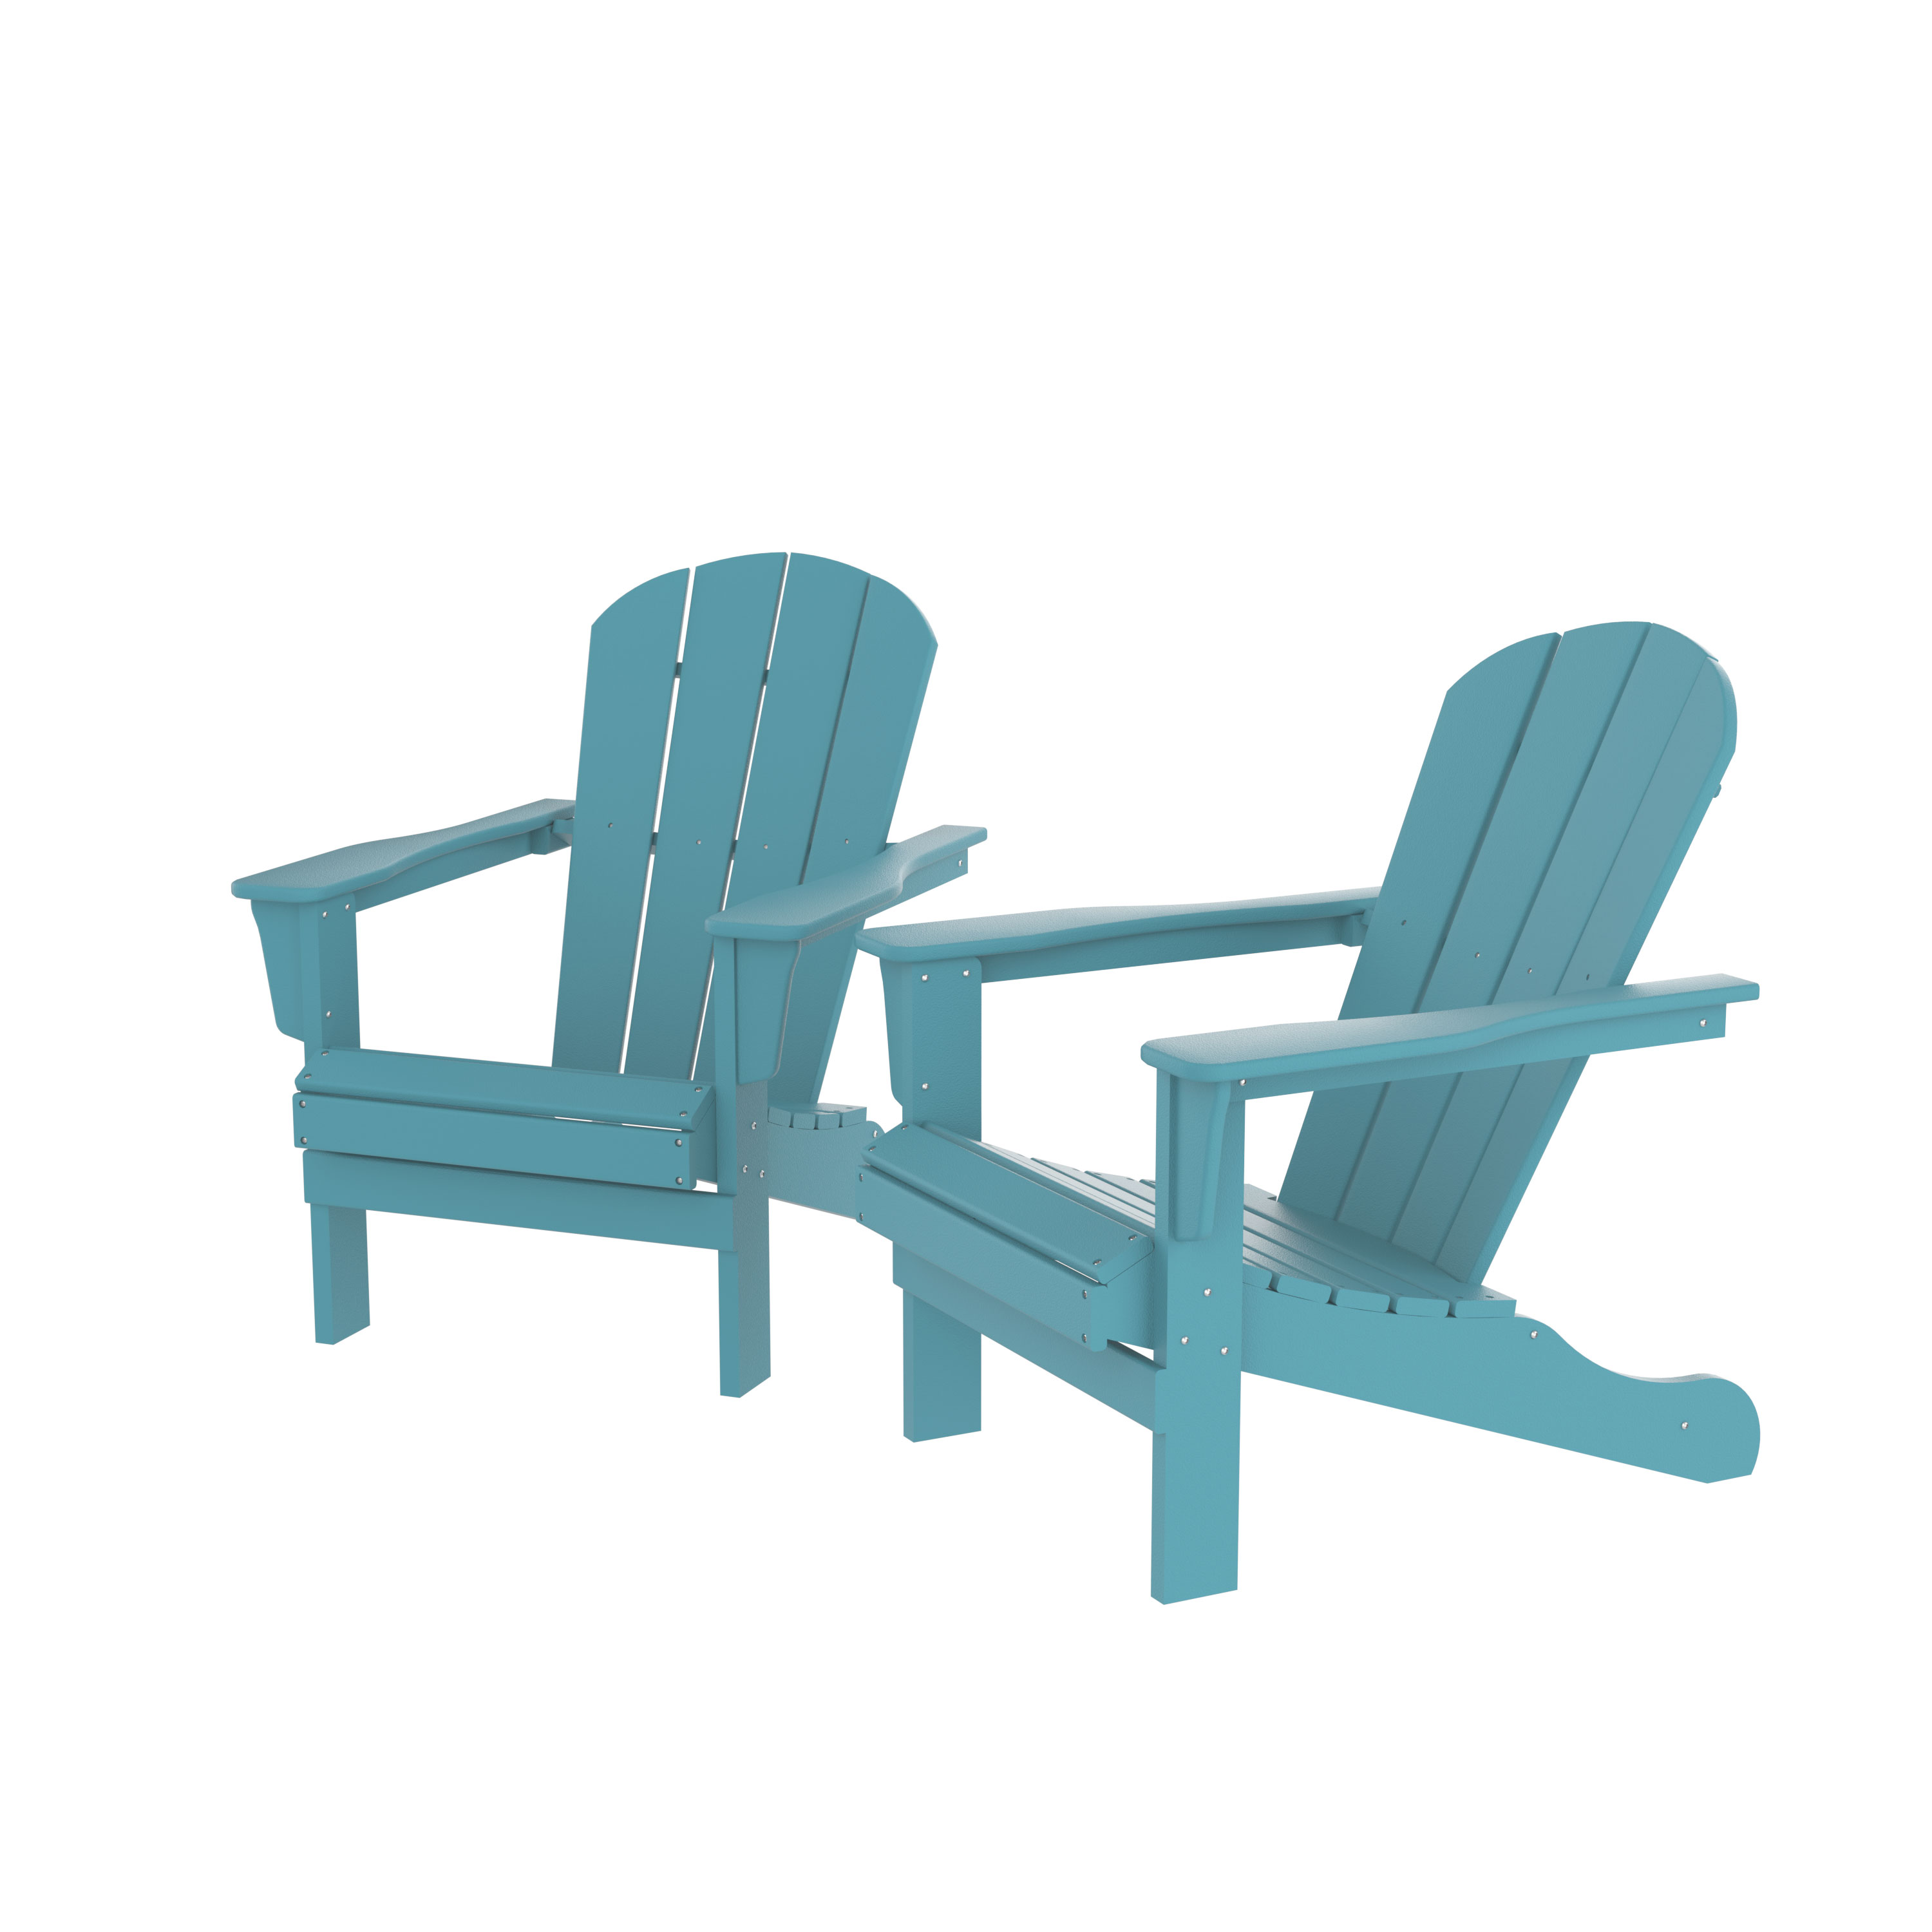 Adirondack Chair, Fire Pit Chairs, Sand Chair, Patio Outdoor Chairs, Dpe Plastic Resin Deck Chair, Lawn Chairs, Adult Size, Weather Resistant For Patio/ Backyard/Garden, Blue, Set Of 2 - image 2 of 6